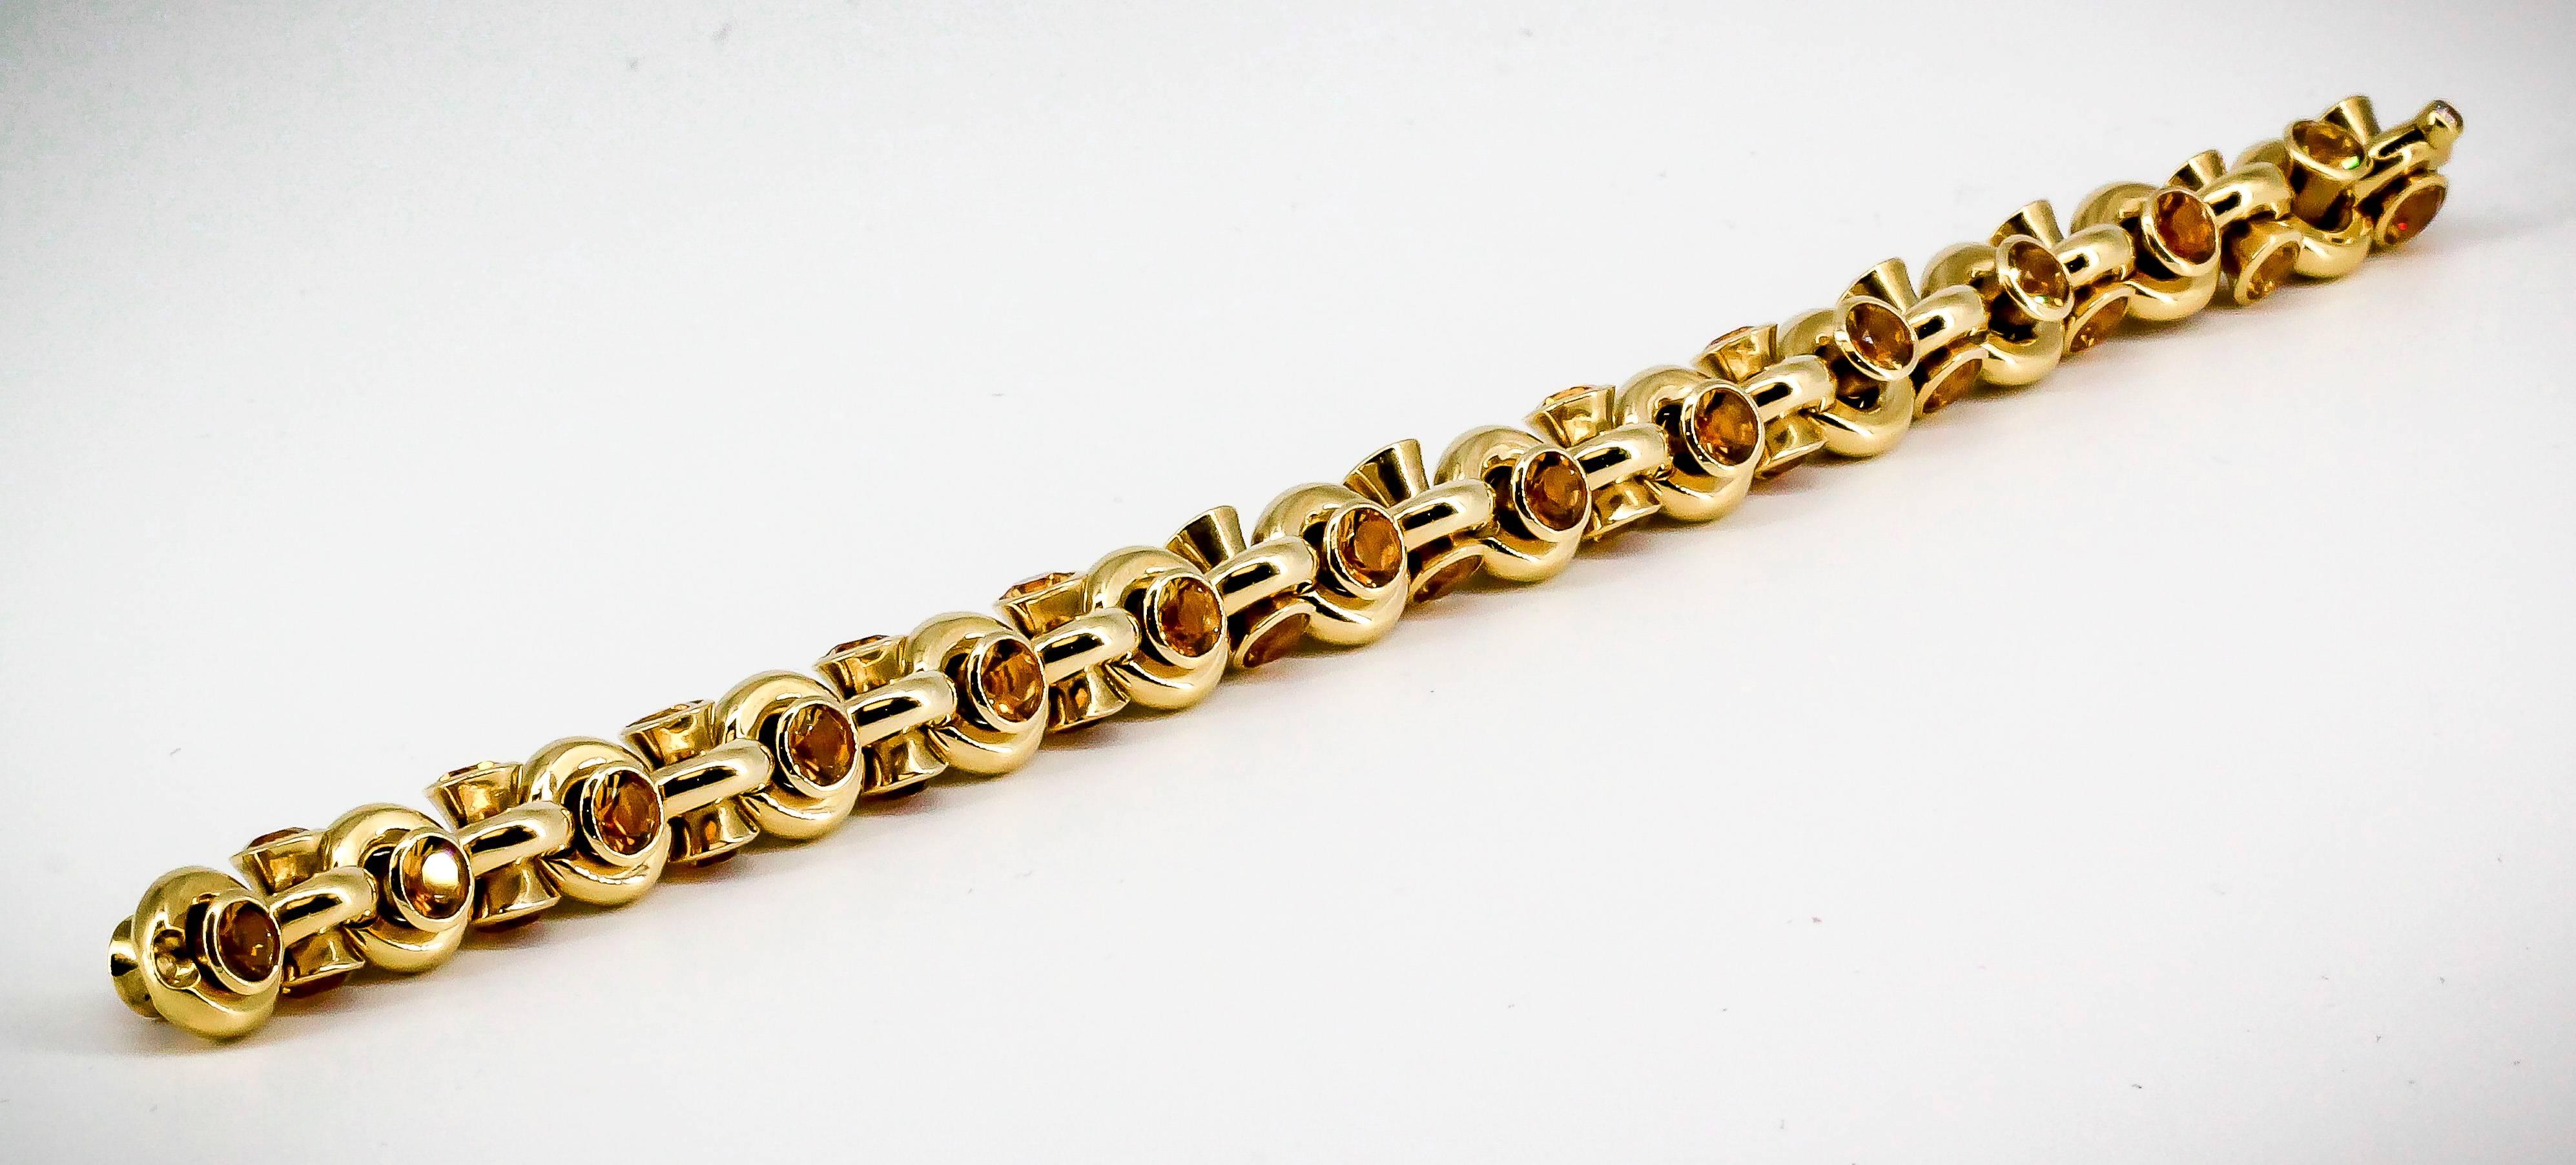 Intricate citrine and yellow 18K gold link bracelet by Hans D. Krieger. It features a rather unusual design, with each link housing a double sided cylinder with citrines on both ends. The clasp features a small diamond and is very well hidden.  A